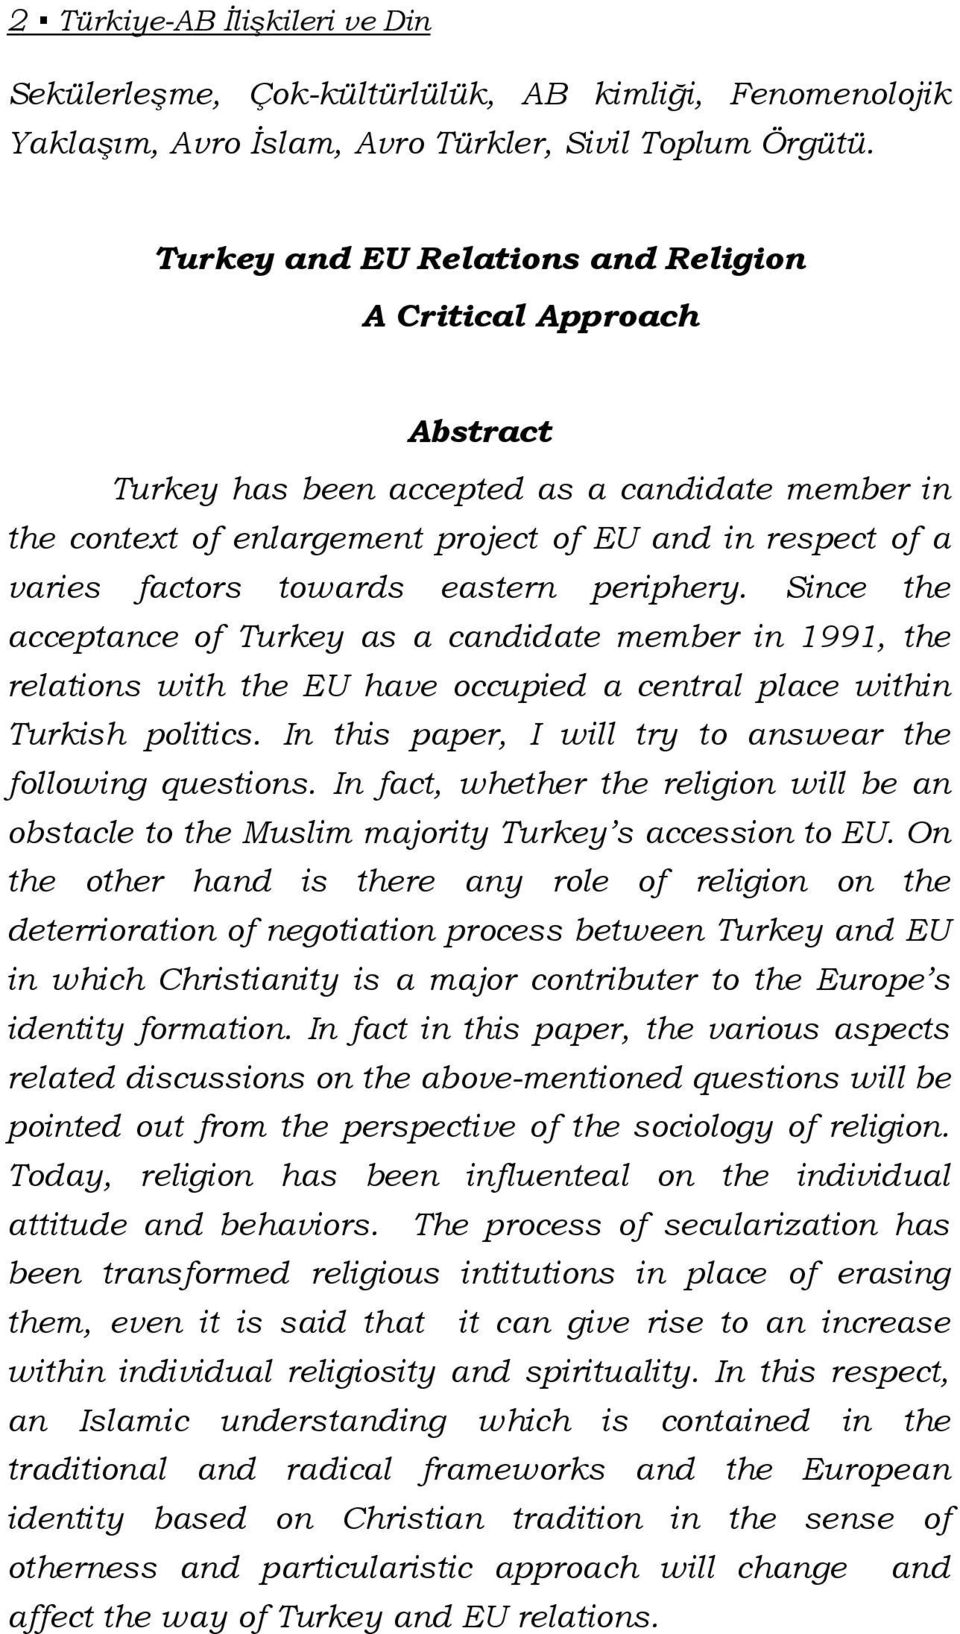 eastern periphery. Since the acceptance of Turkey as a candidate member in 1991, the relations with the EU have occupied a central place within Turkish politics.